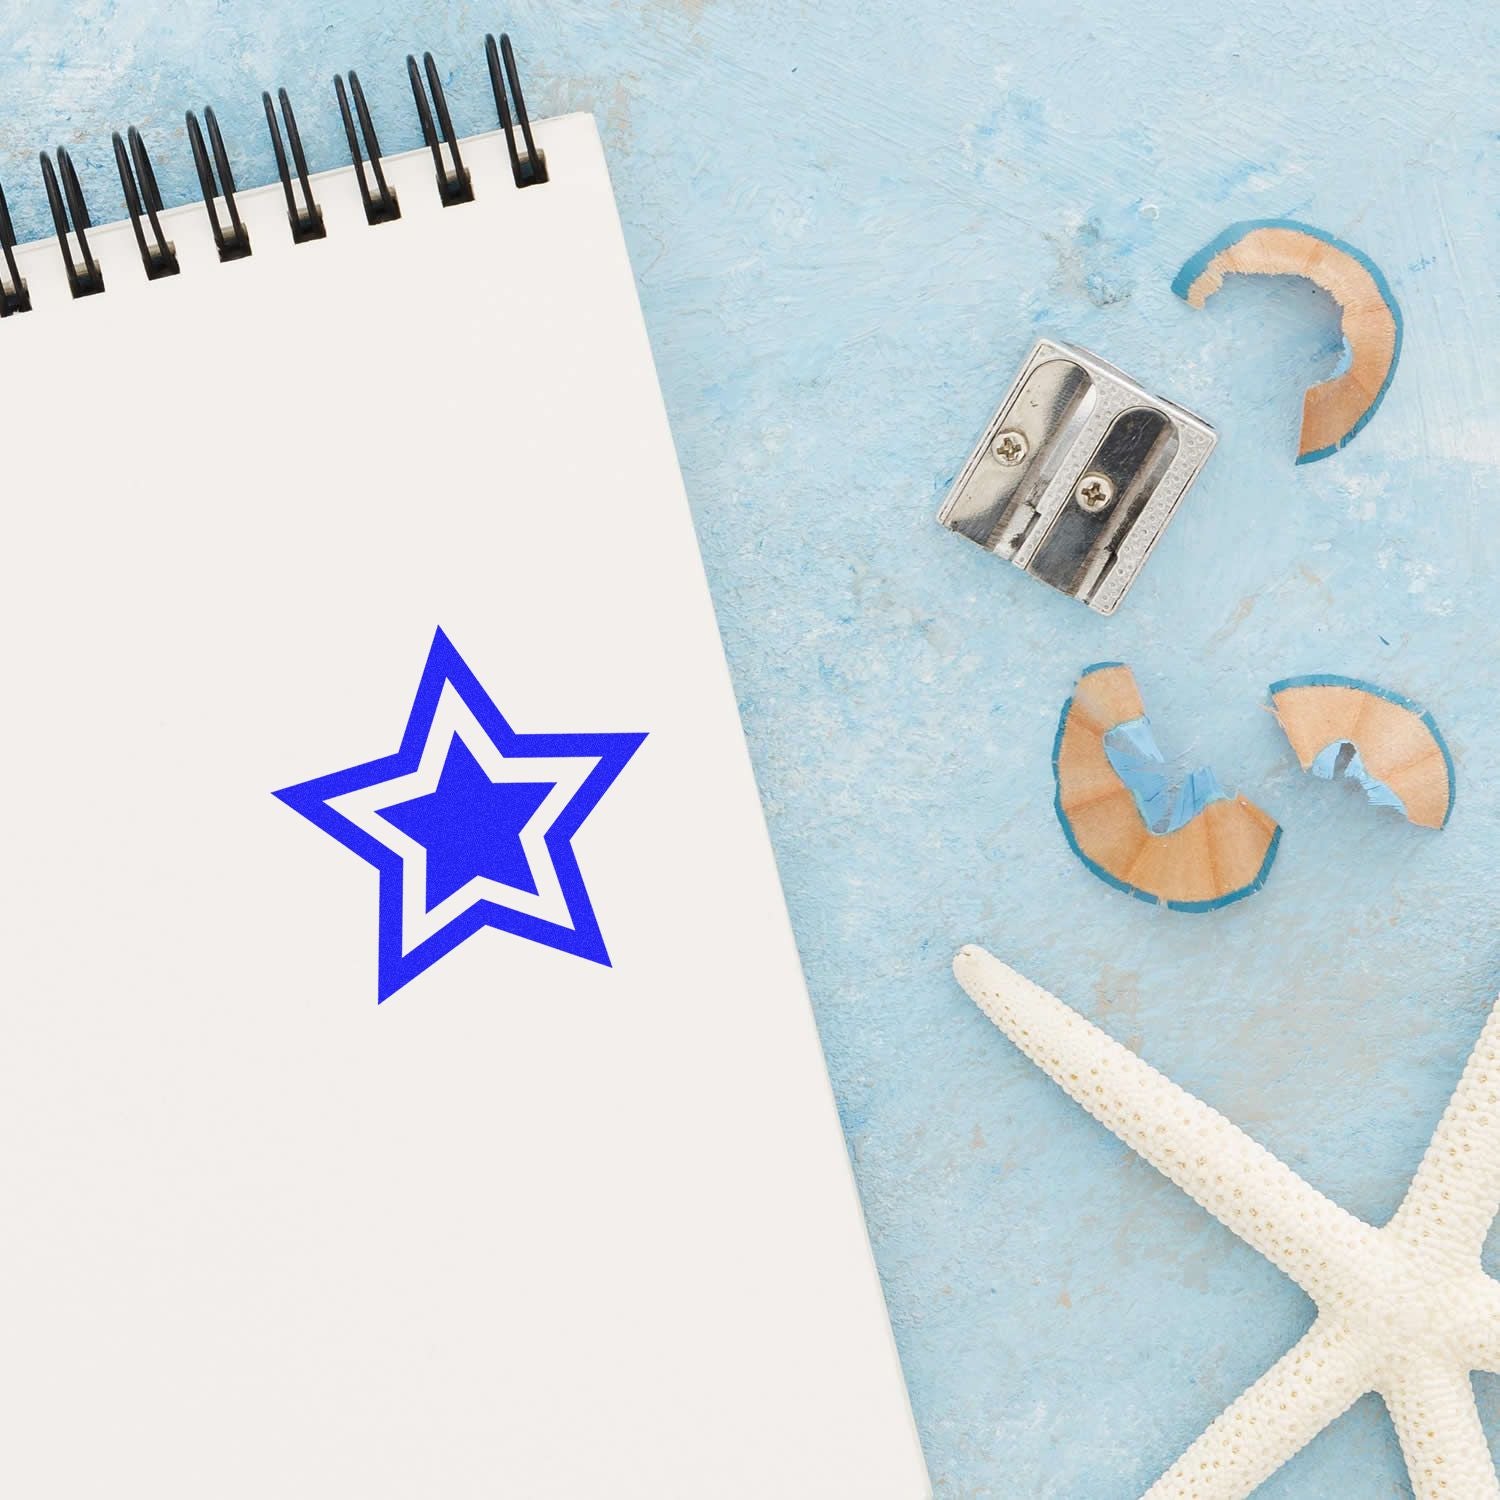 Round Double Star Rubber Stamp In Use Photo